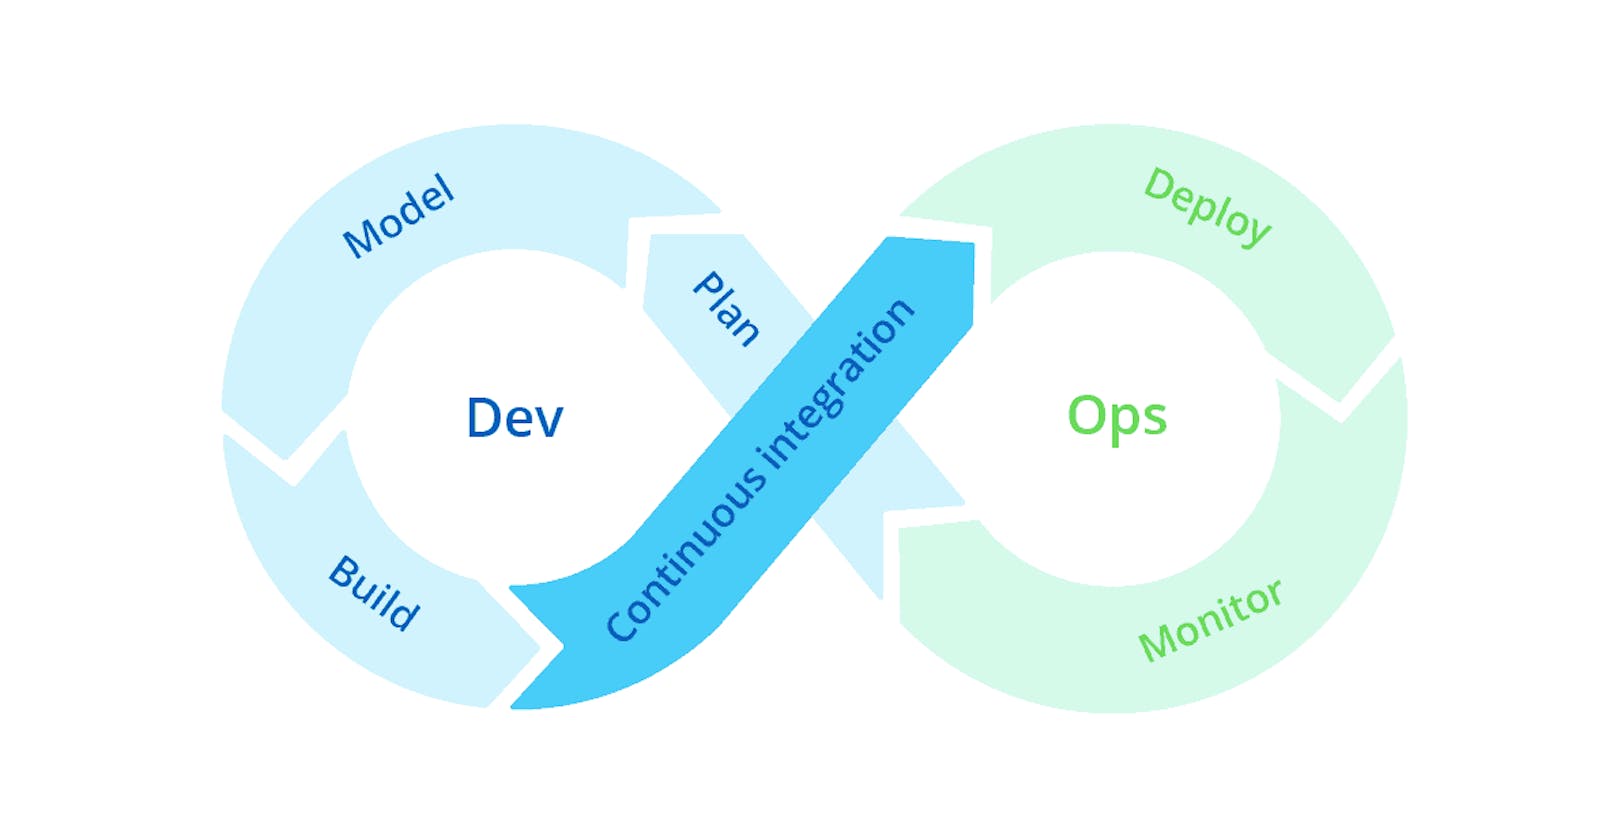 Day 7: The Role of Testing in DevOps